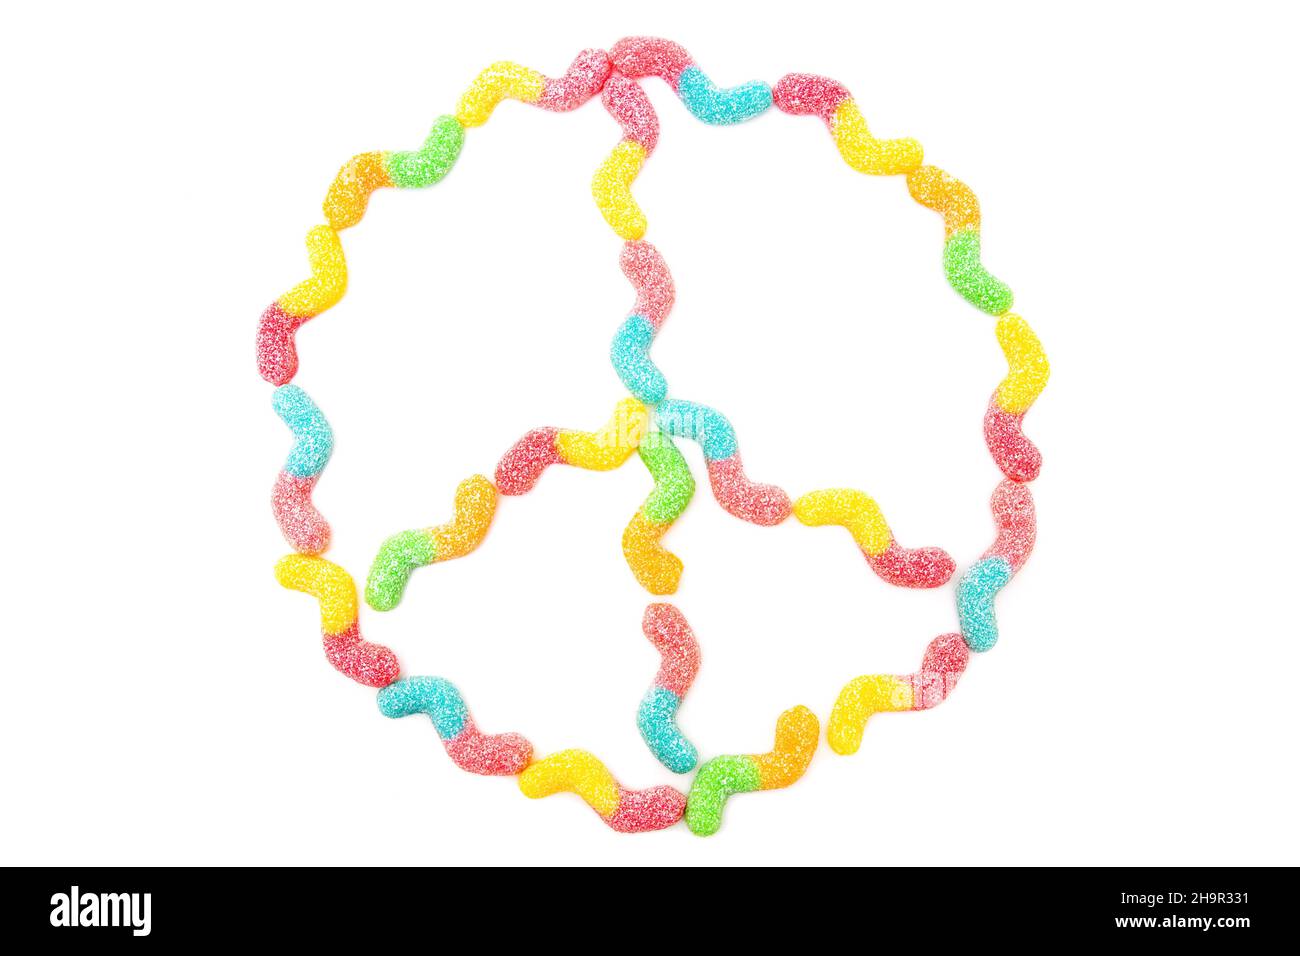 Peace sign made from multicolored sugar coated gummy worms isolated on white. Anti-war symbol. Stock Photo